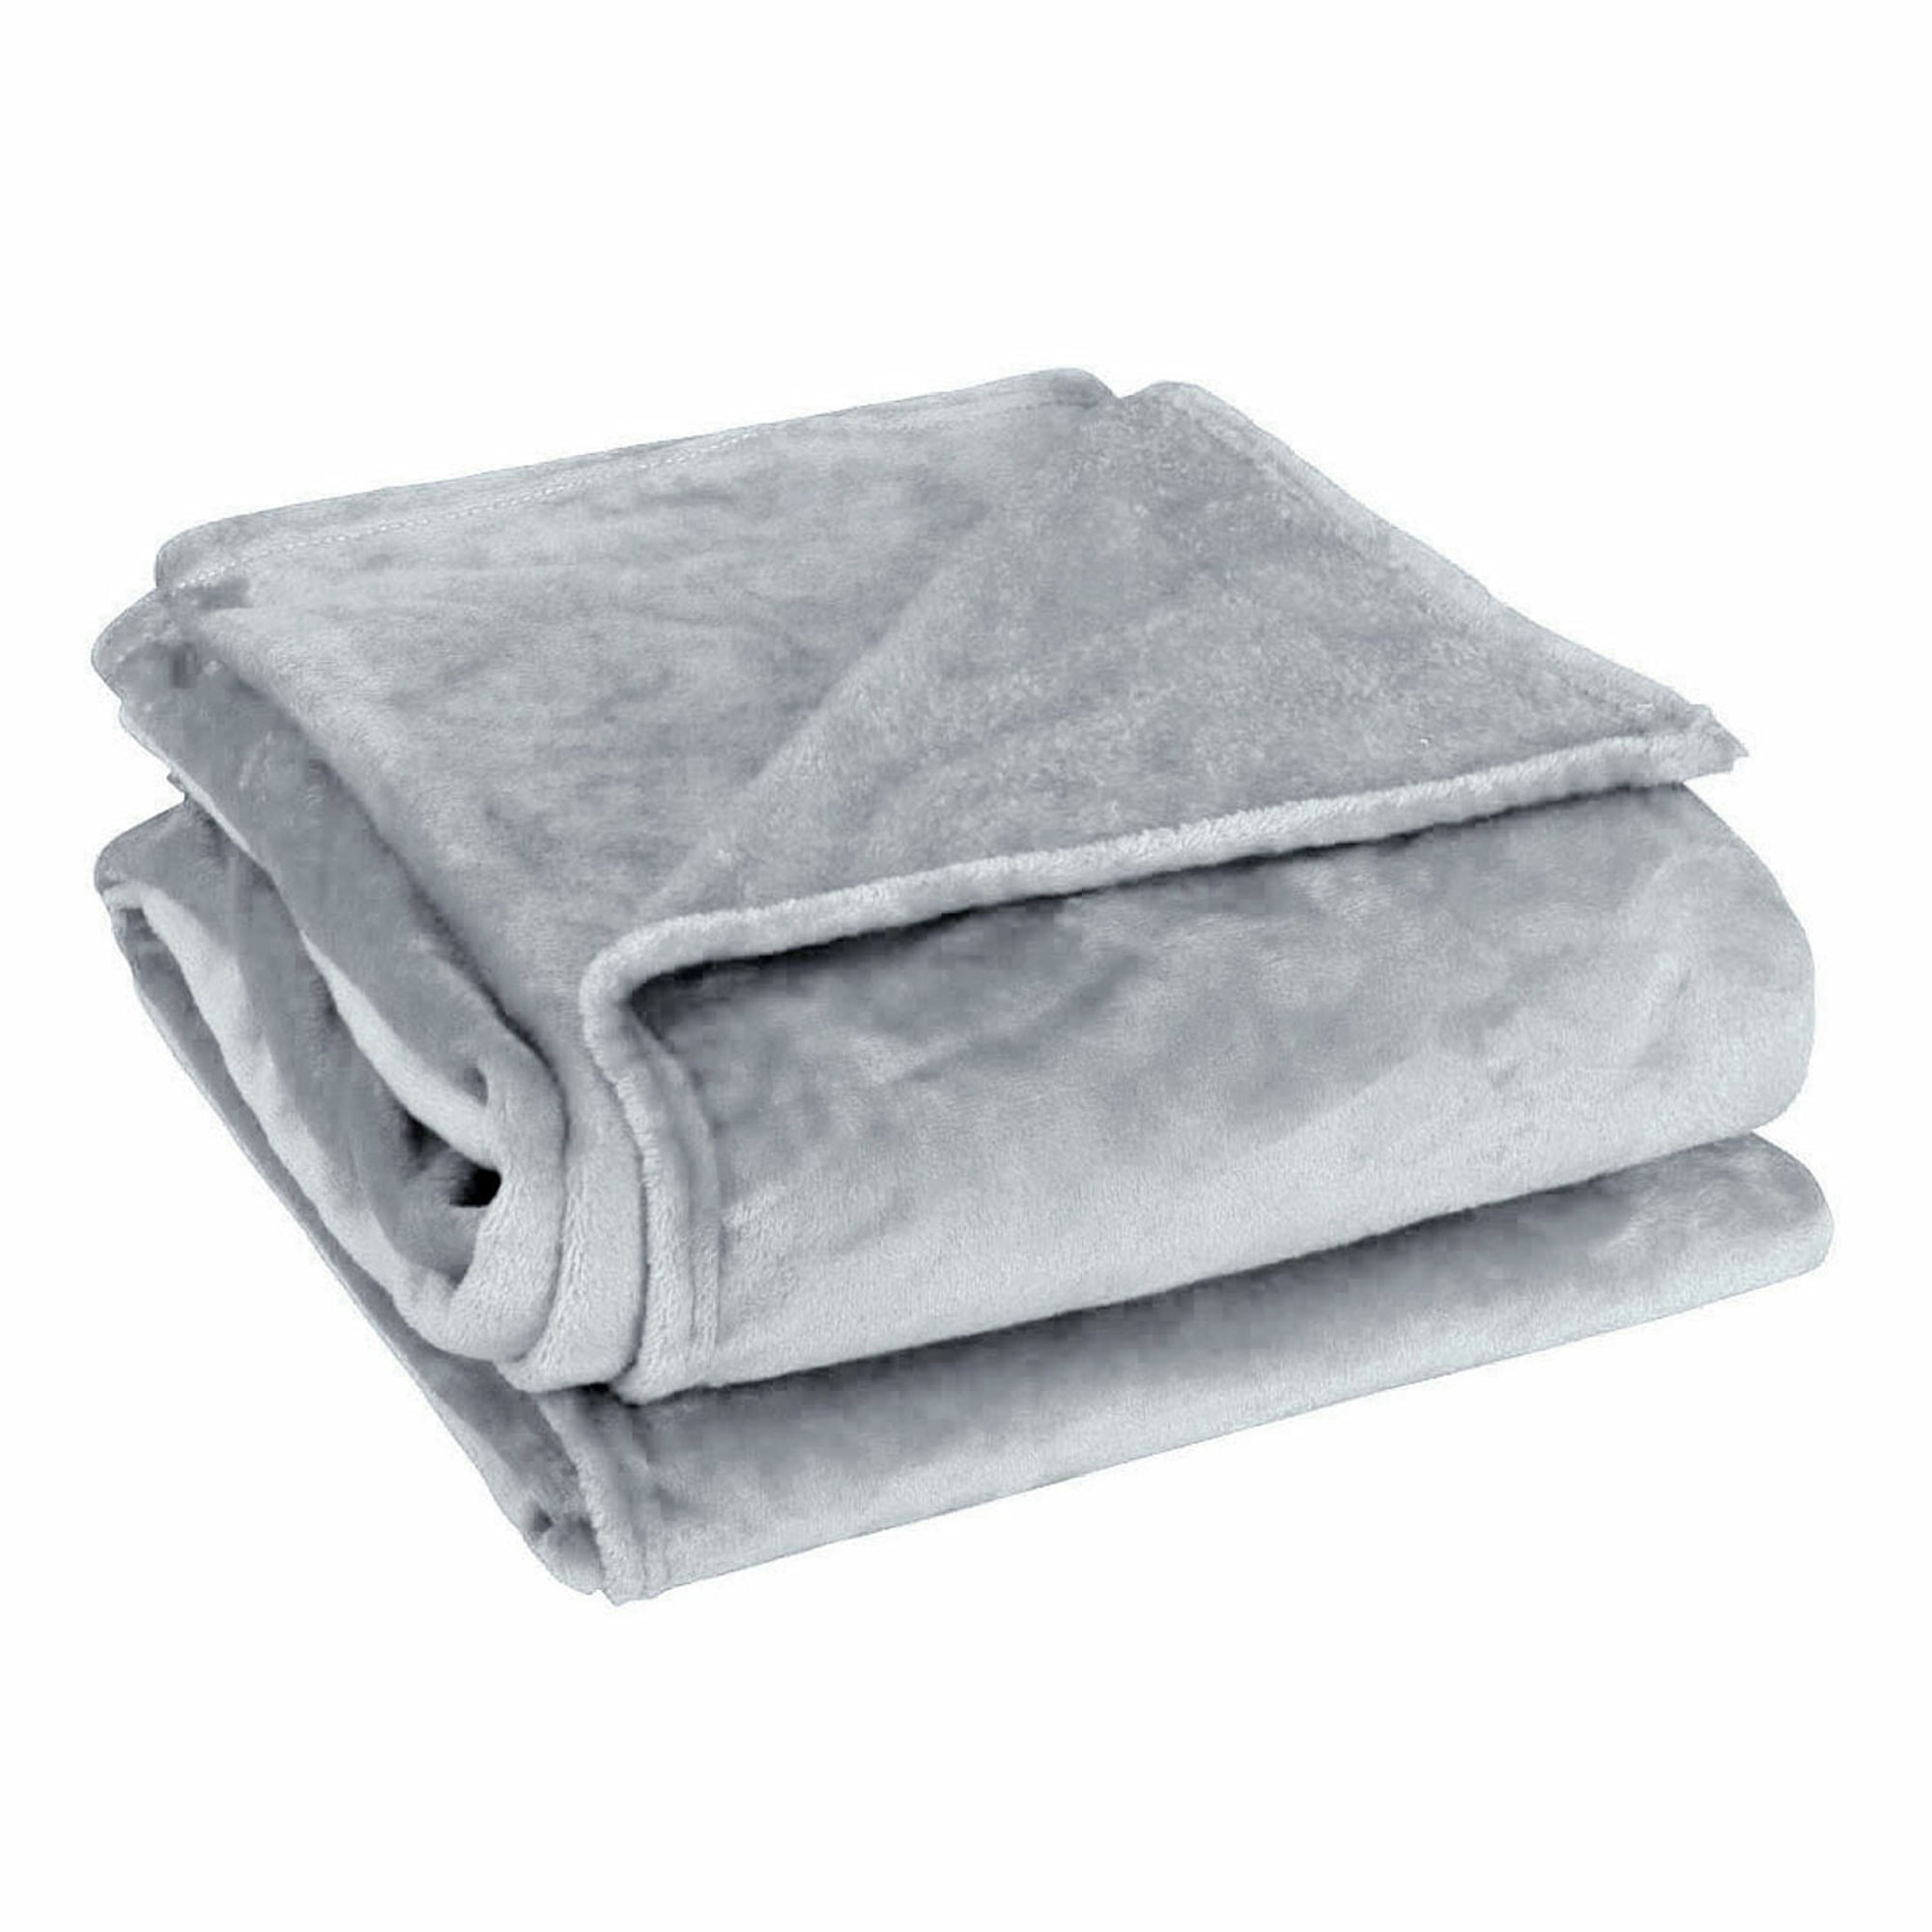 TYRY.HU Brand Flannel Fleece Baby Small Blanket - Ultra Soft Plush Thin  Blanket for Outdoor Travel